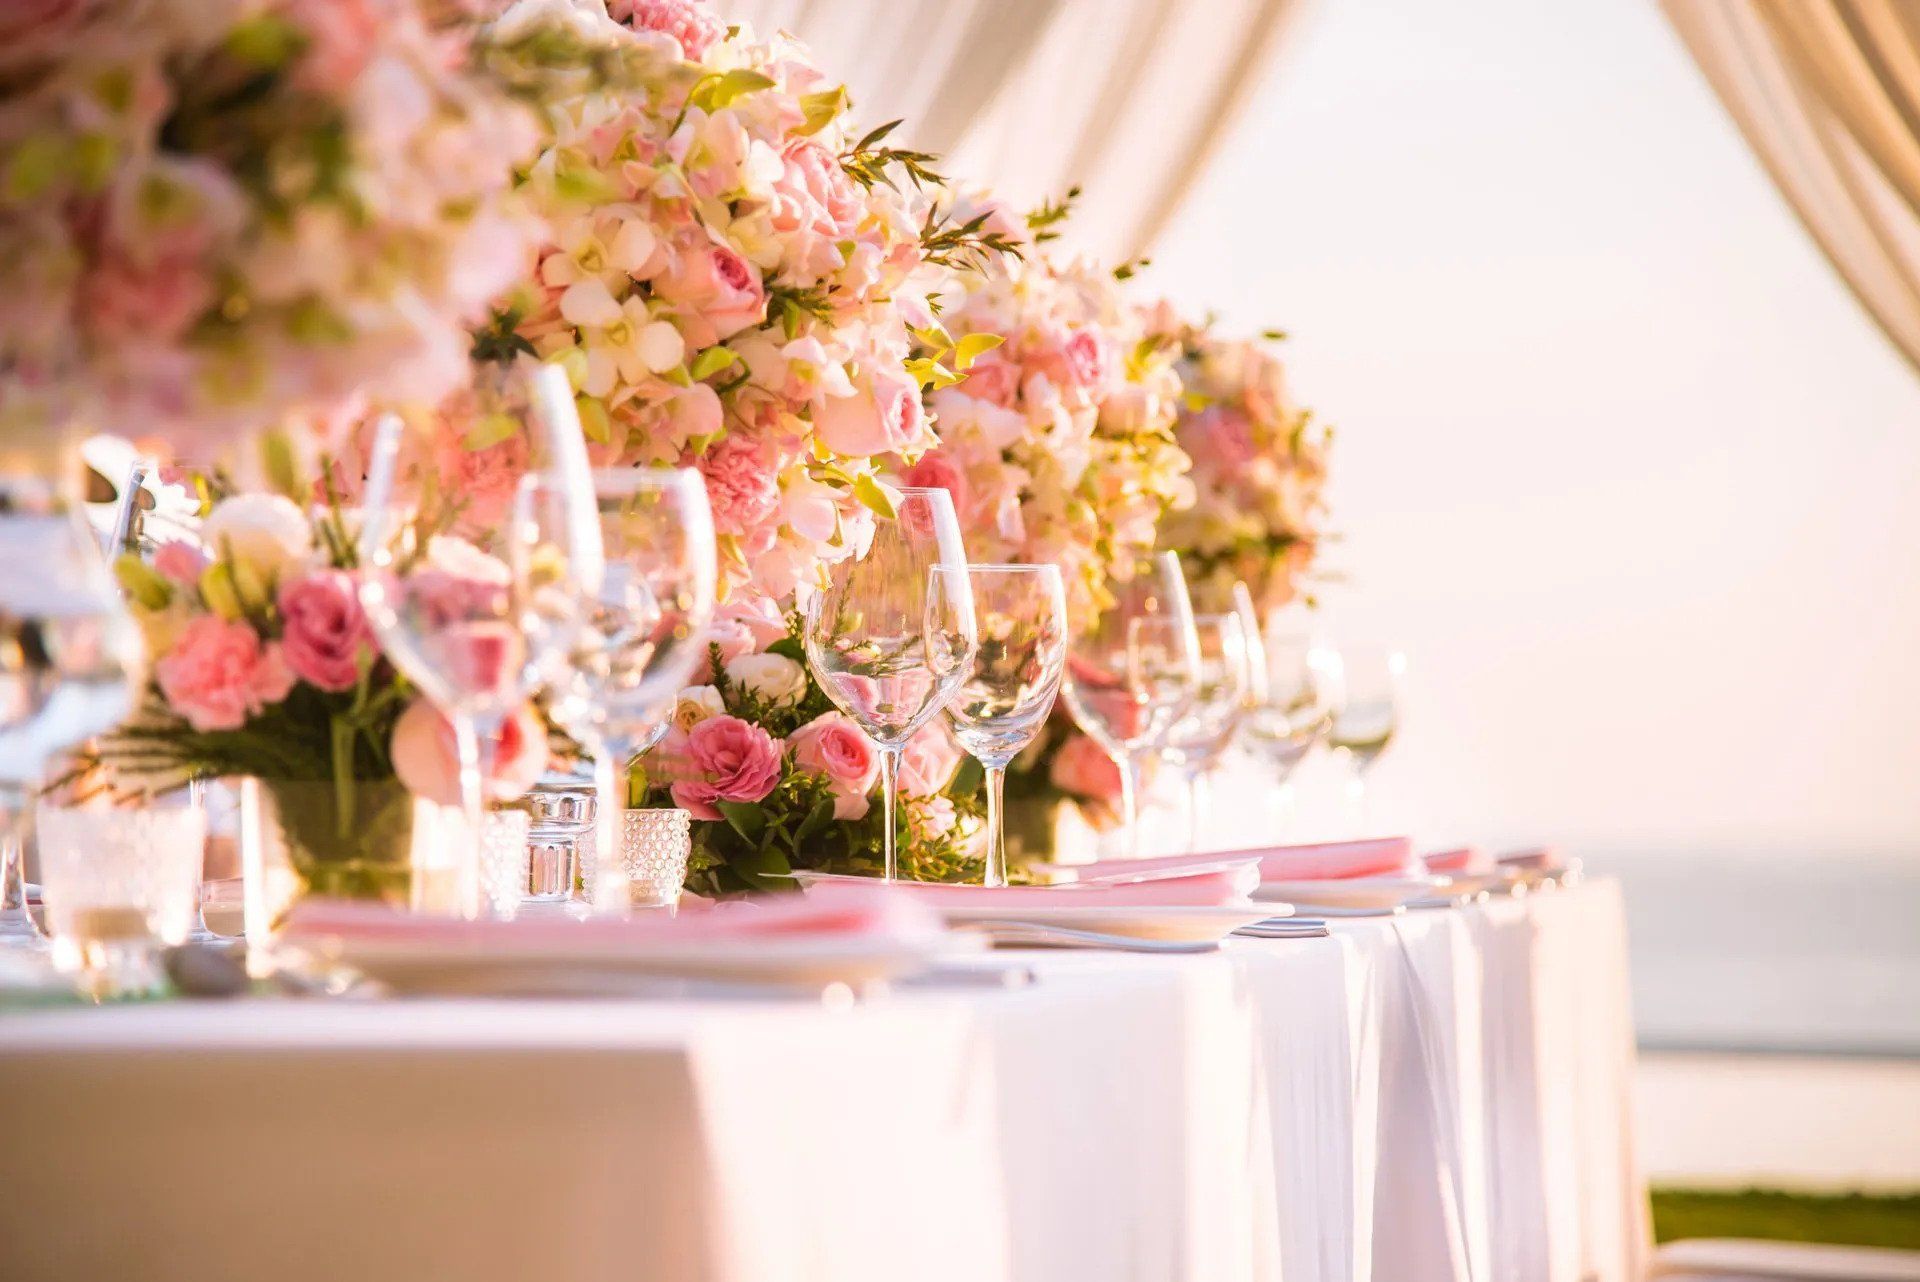 table setting with bunch of flowers